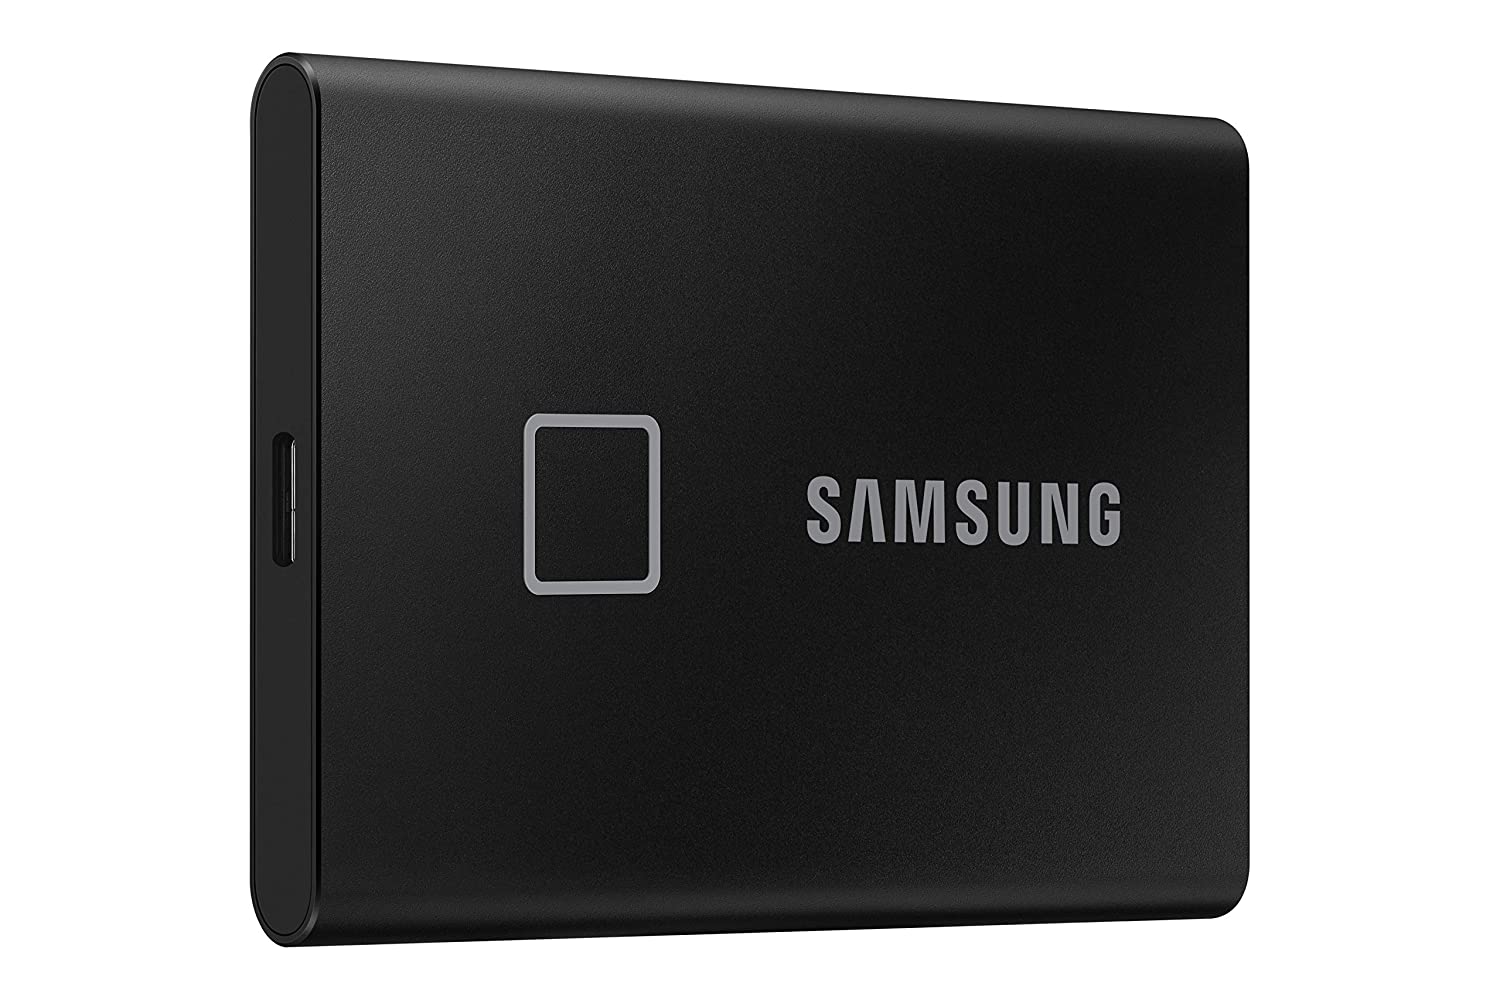 Samsung 1TB T7 Touch External Solid State Drive Upto 1050MB/s Portable SSD